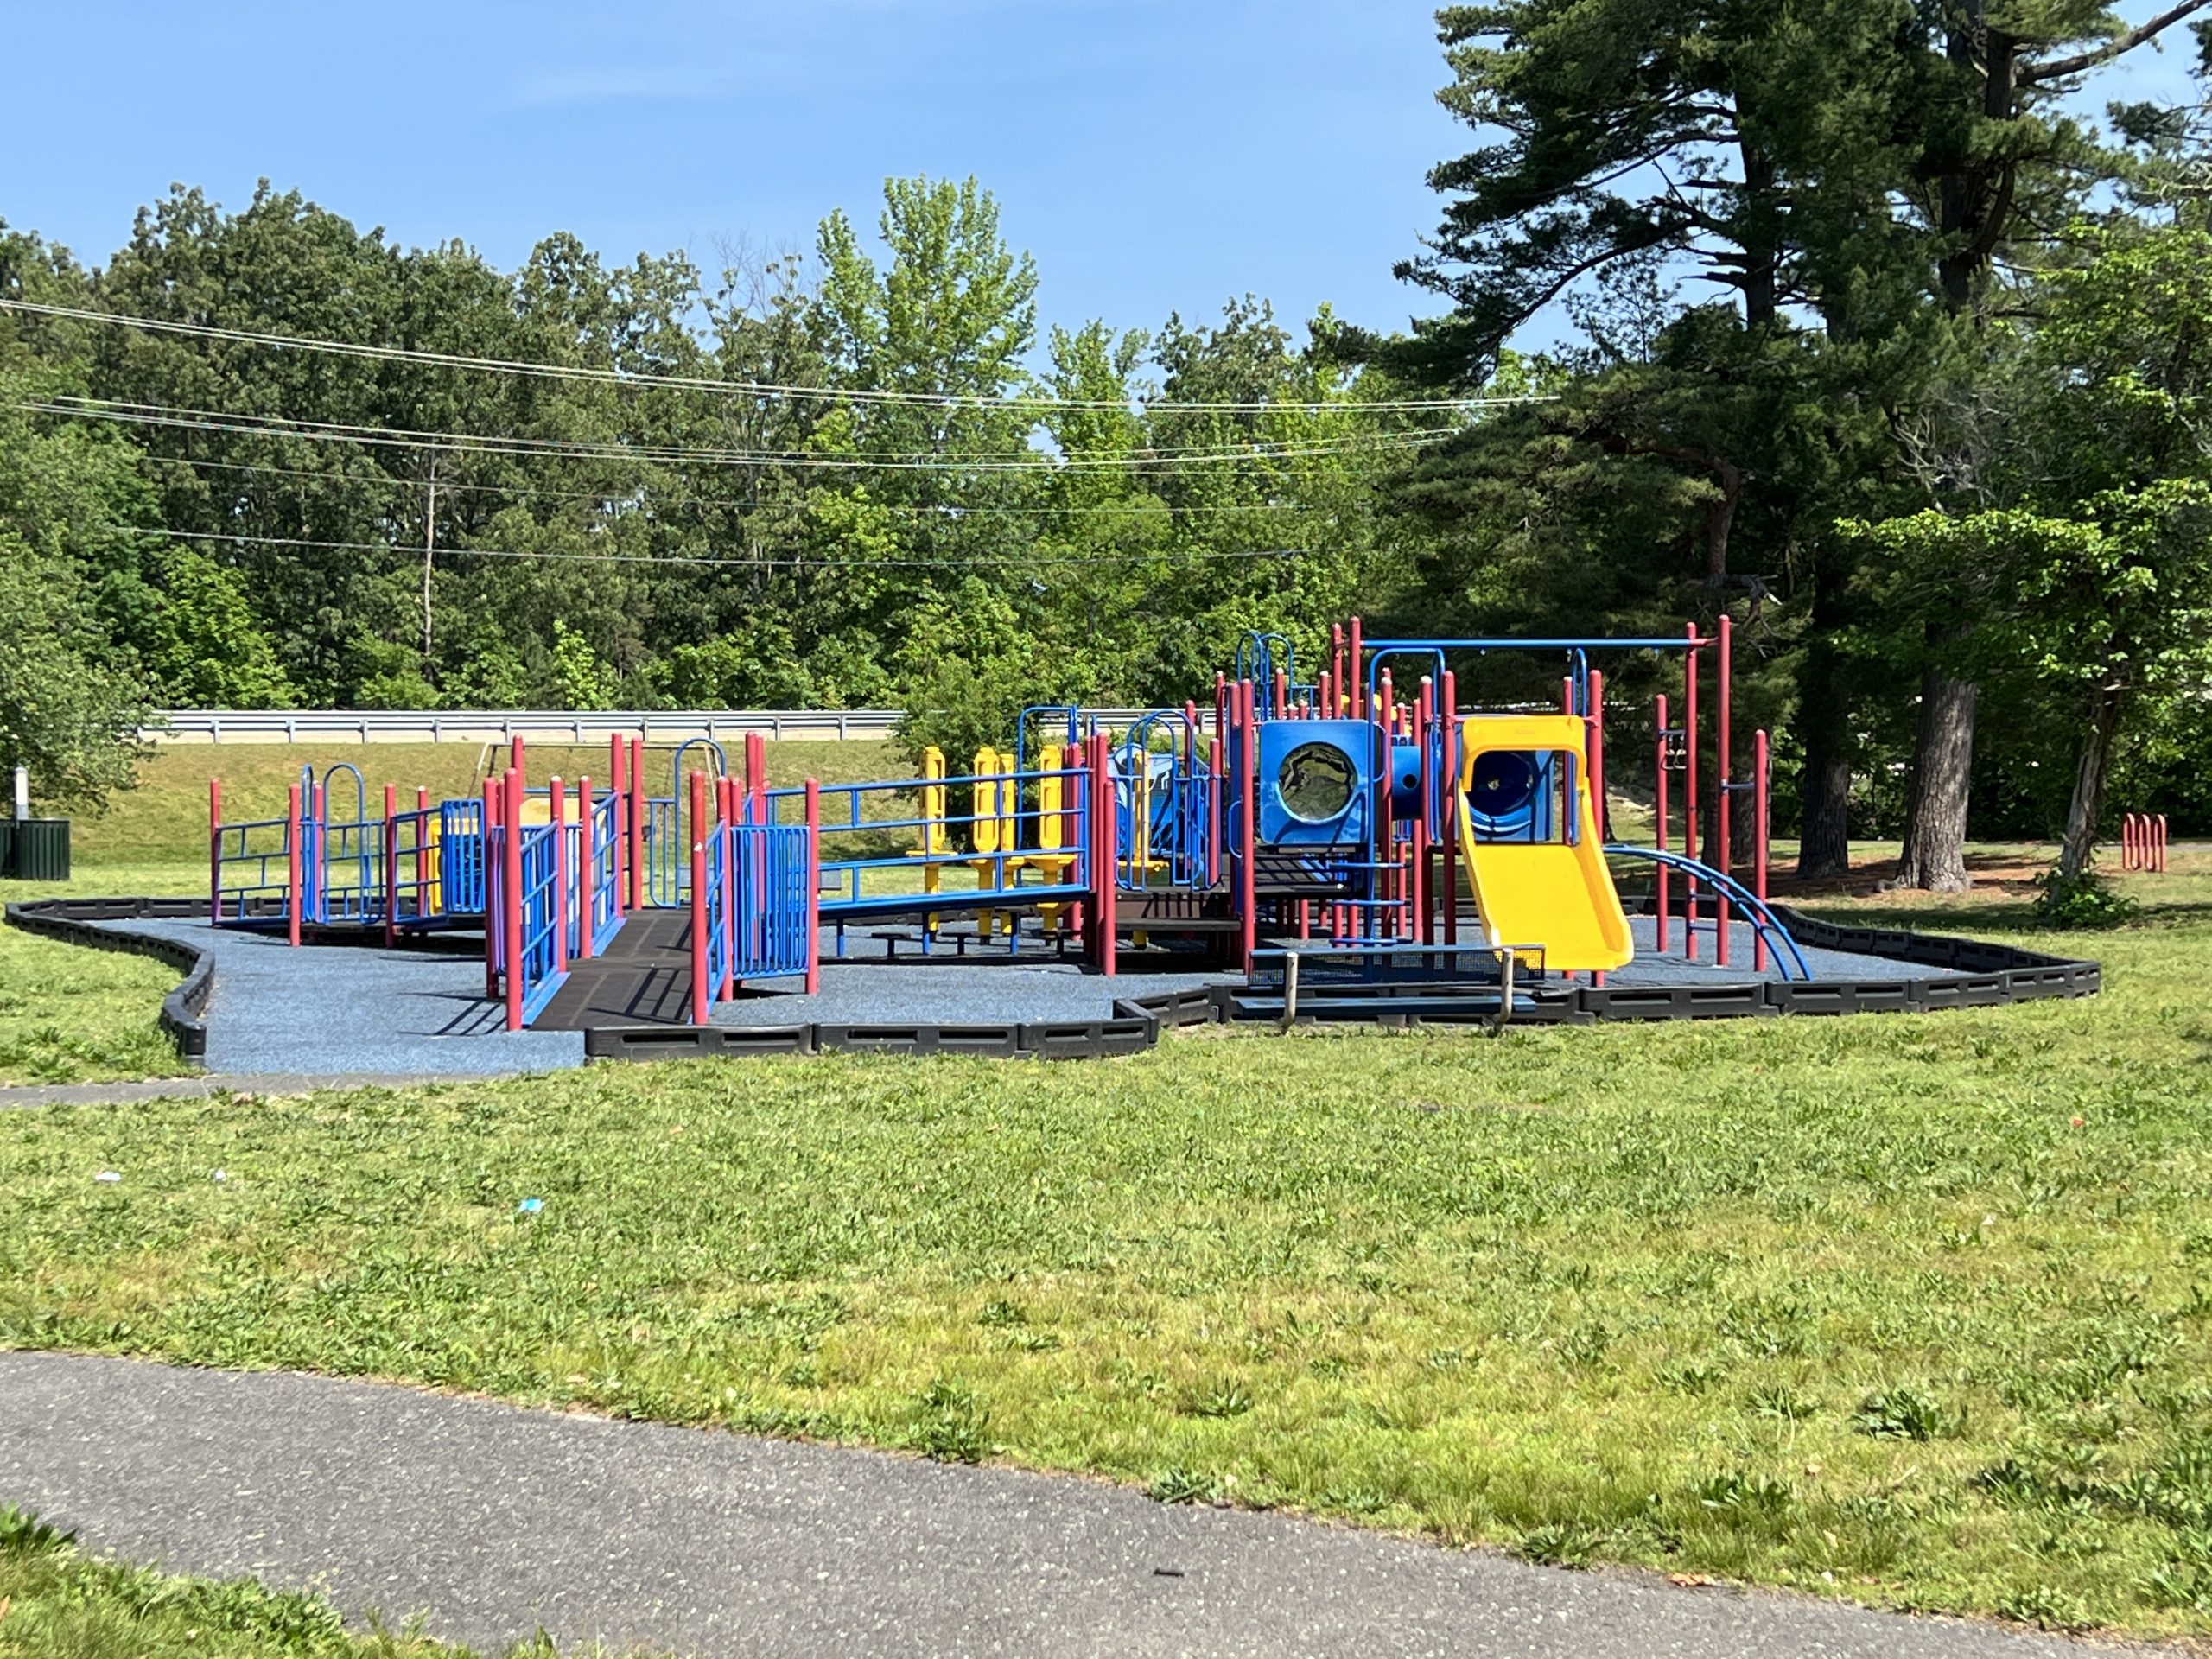 Horizontal picture of newer Waltman Park Playground in Millville NJ